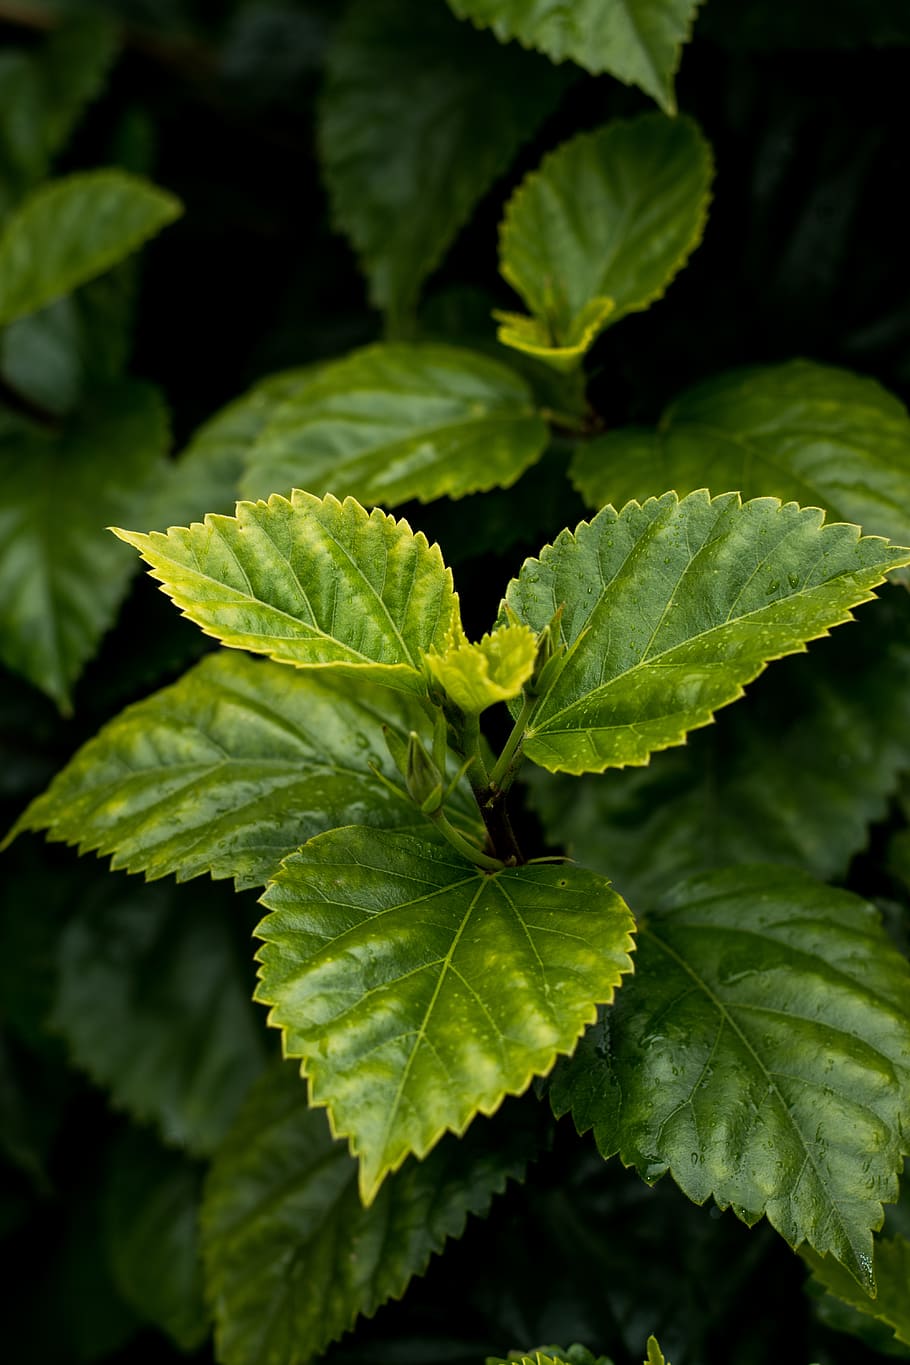 ovate leafed plant, plant part, green color, growth, close-up